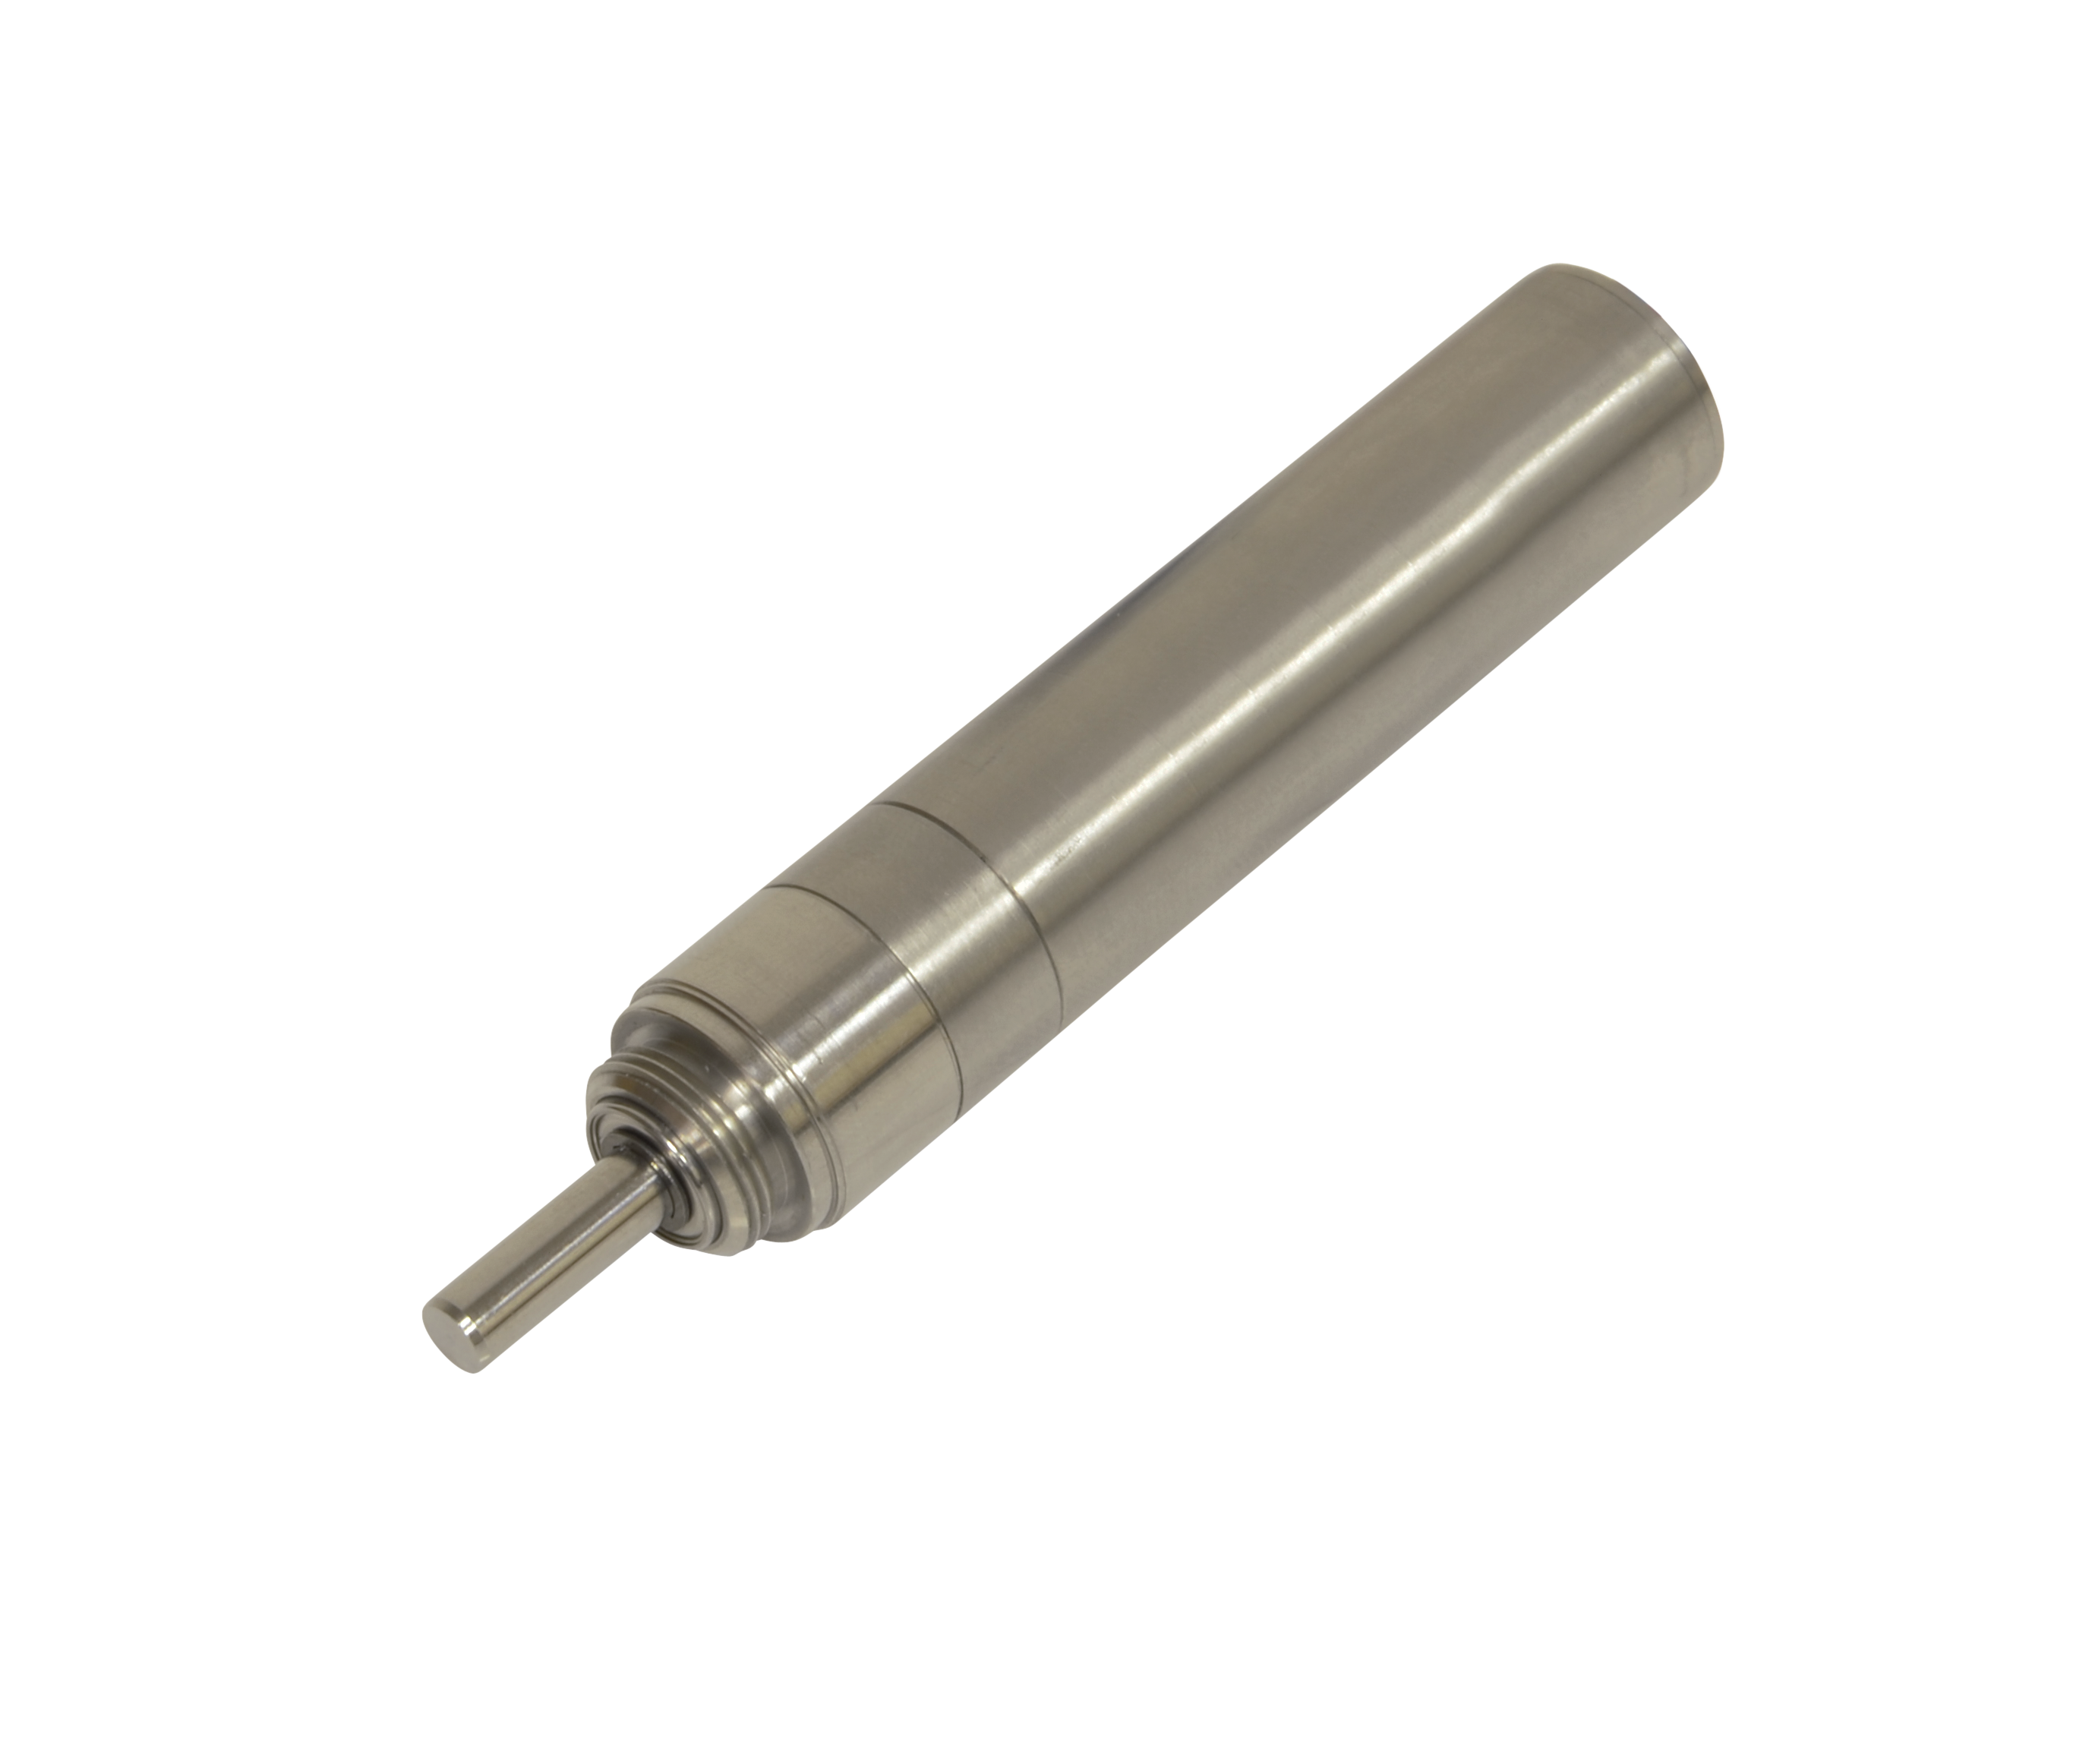 New Generation Sterilizable Arthroscopic Joint Shaver High Speed Gearmotor Joins Portescap’s Surgical Motor Solutions Portfolio